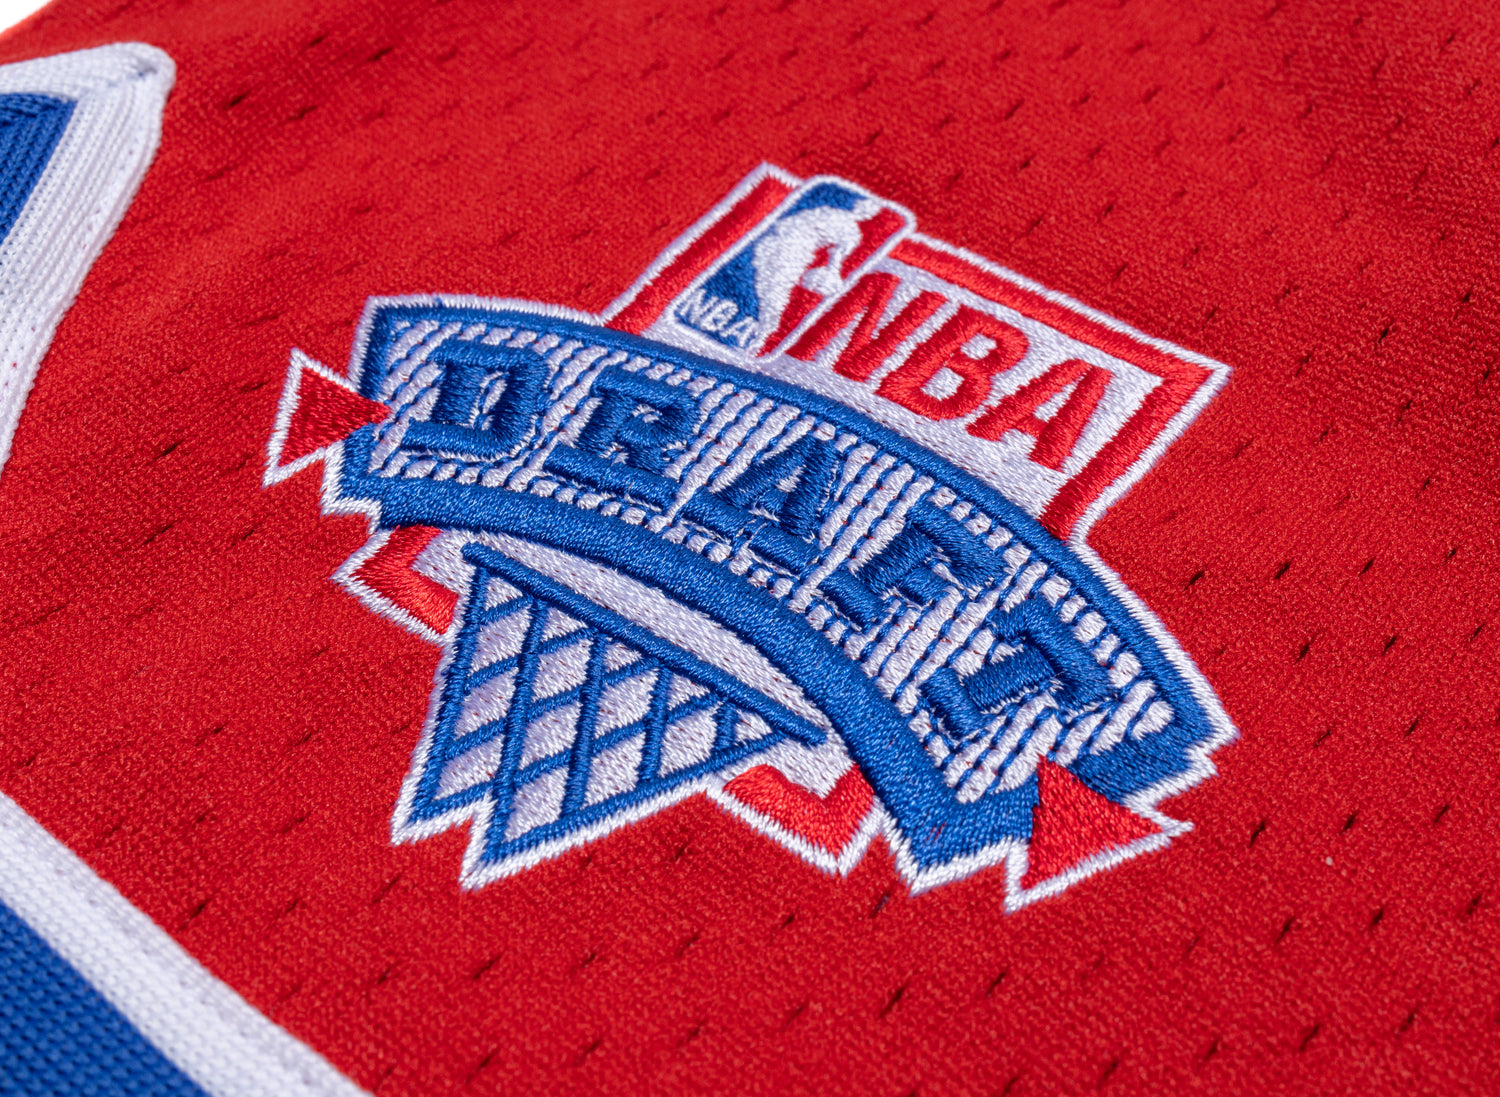 mitchell and ness bullets jersey